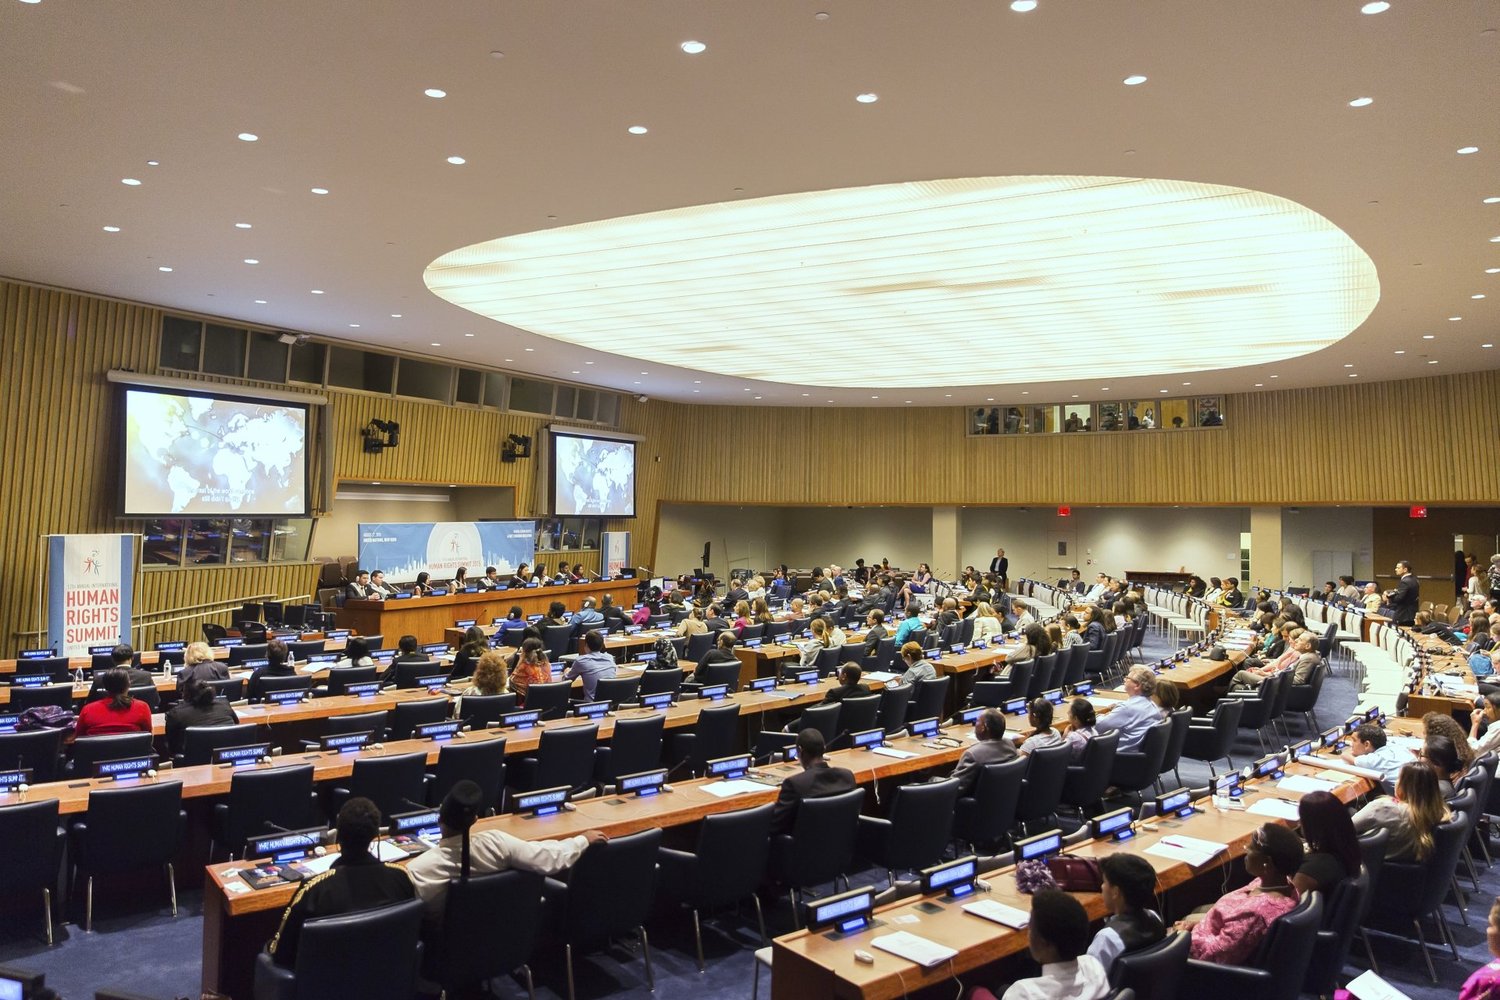 United Nations Hosts 12th Annual International Human Rights Summit